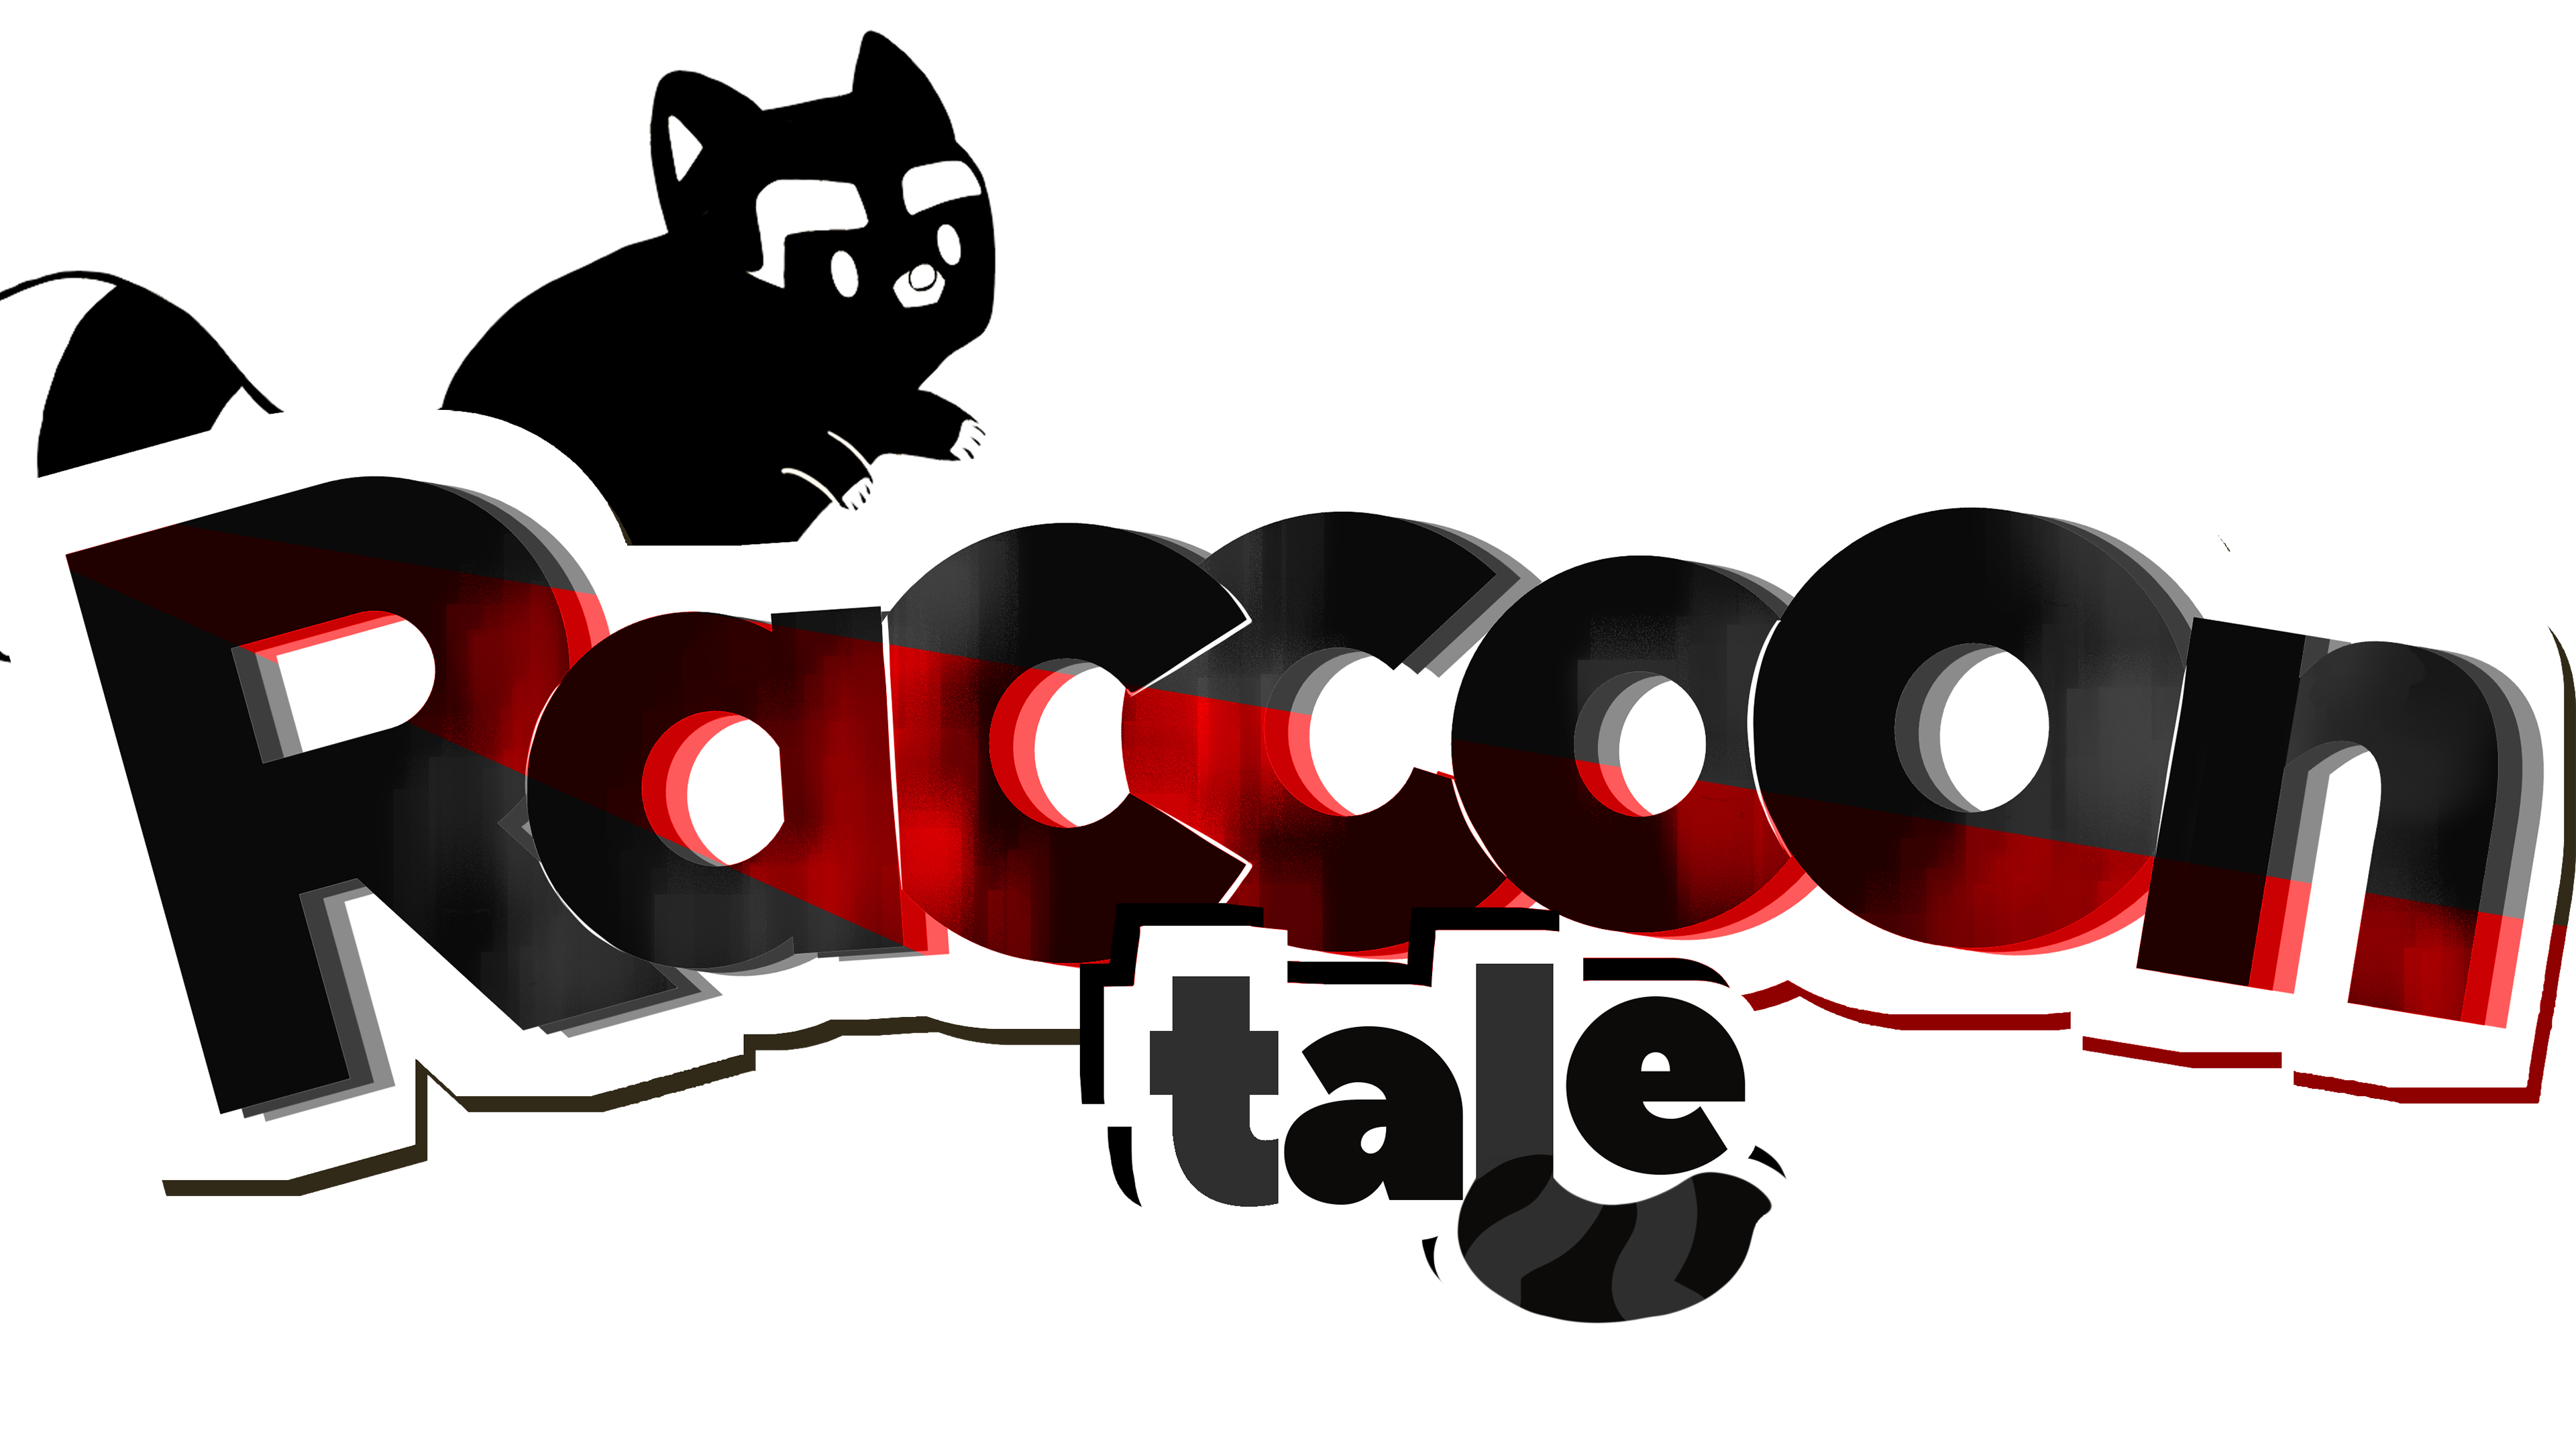 Our first game: Raccoon Tale